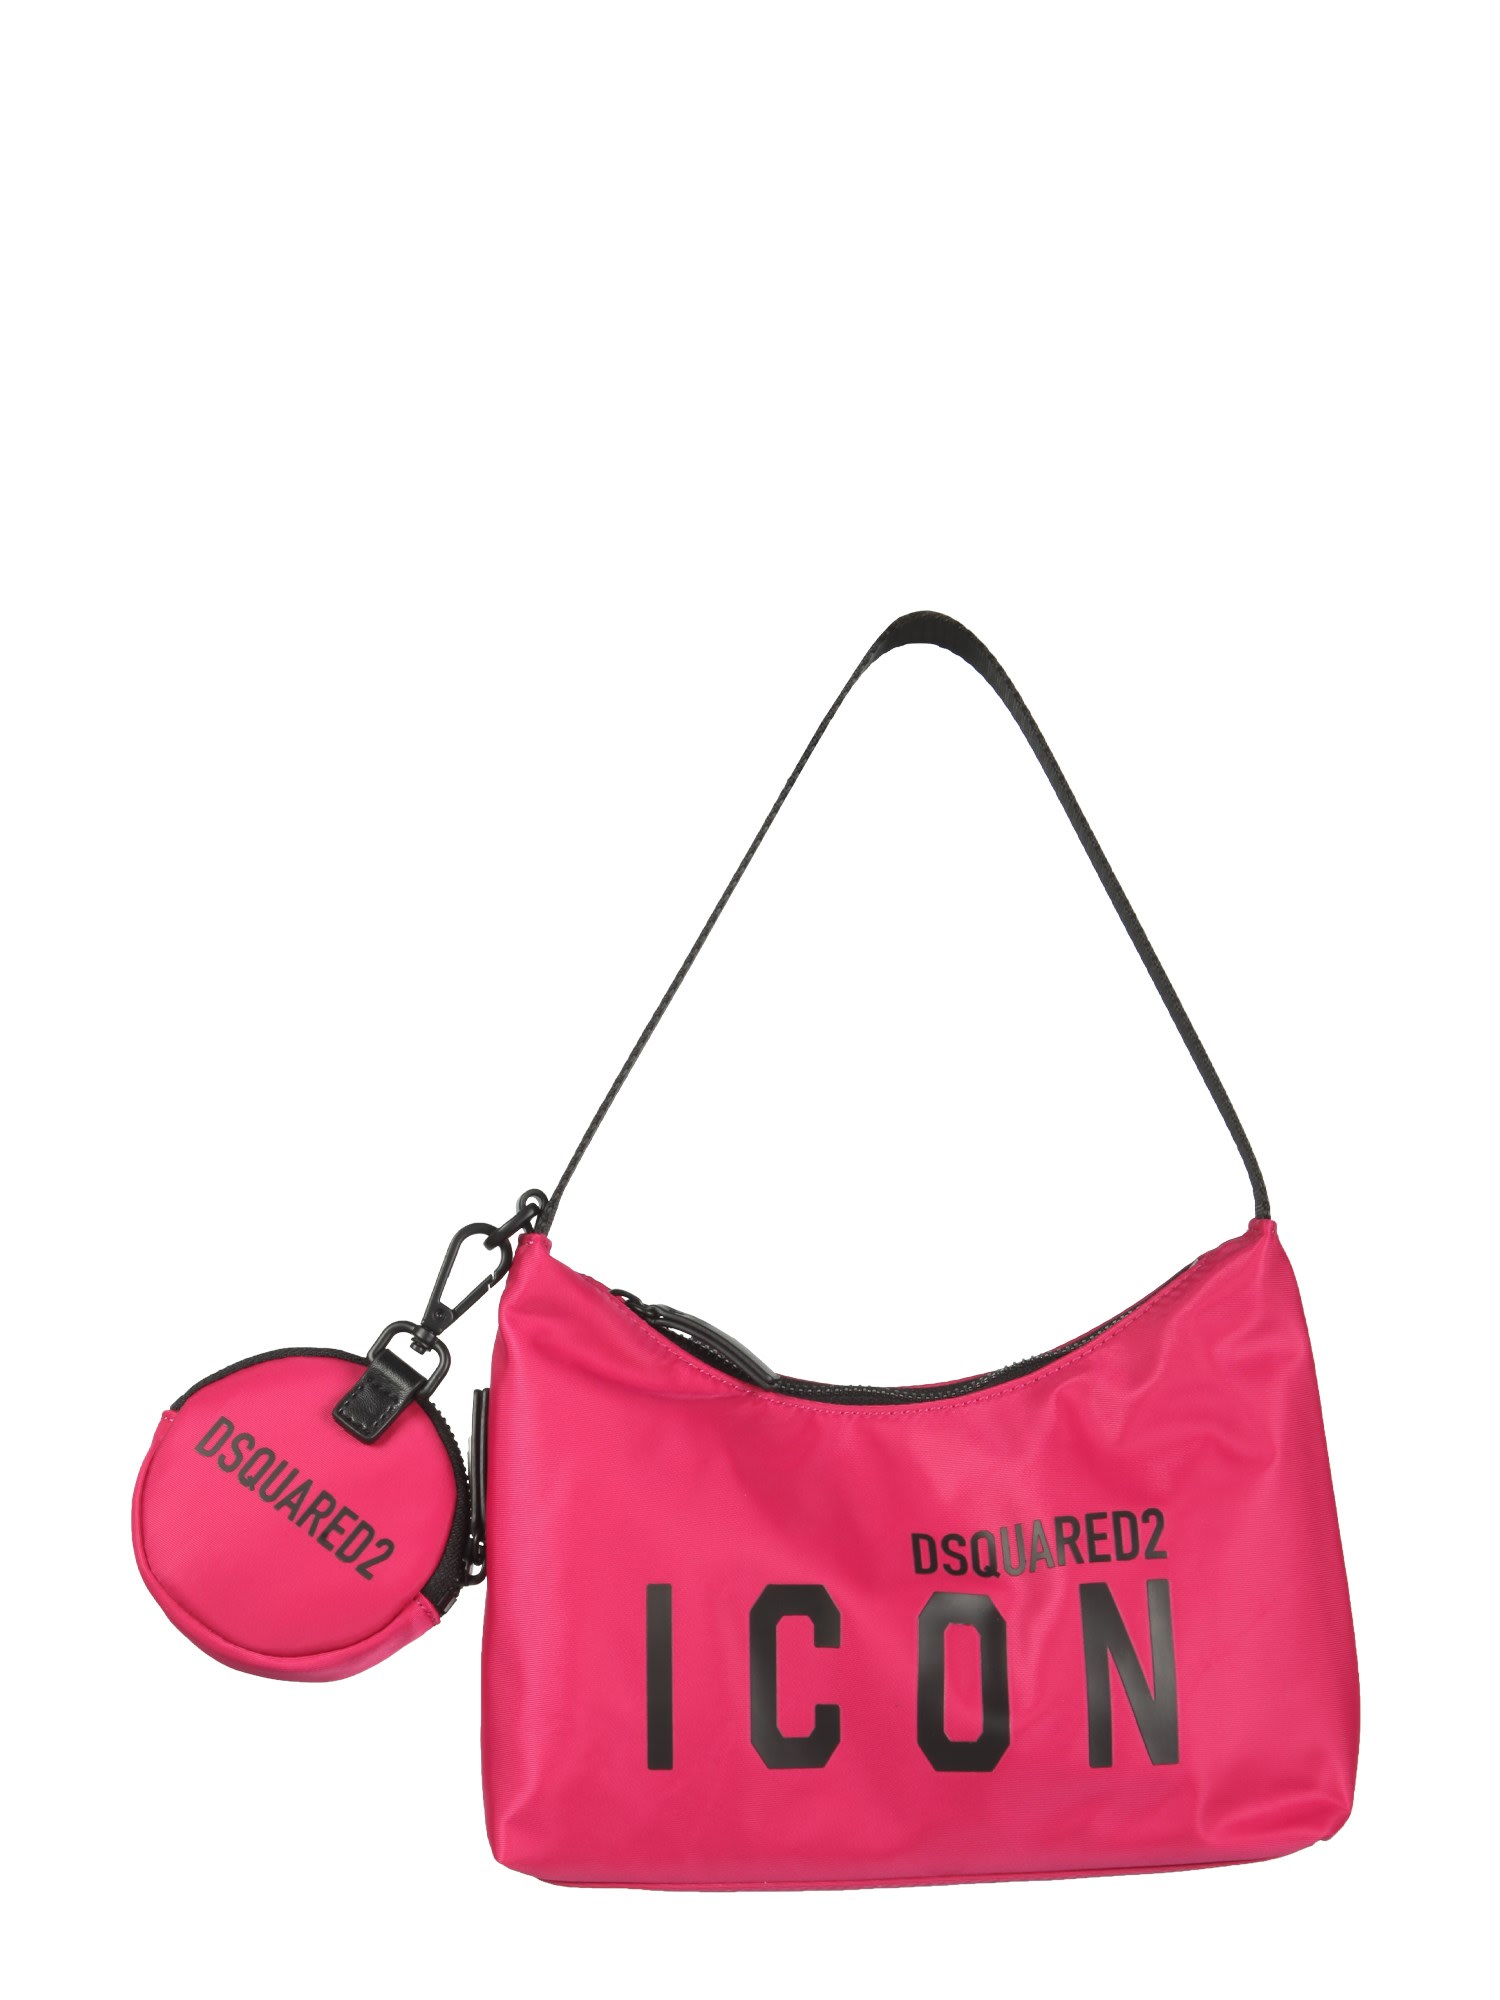 Dsquared2 Hobo Bag With Icon Print